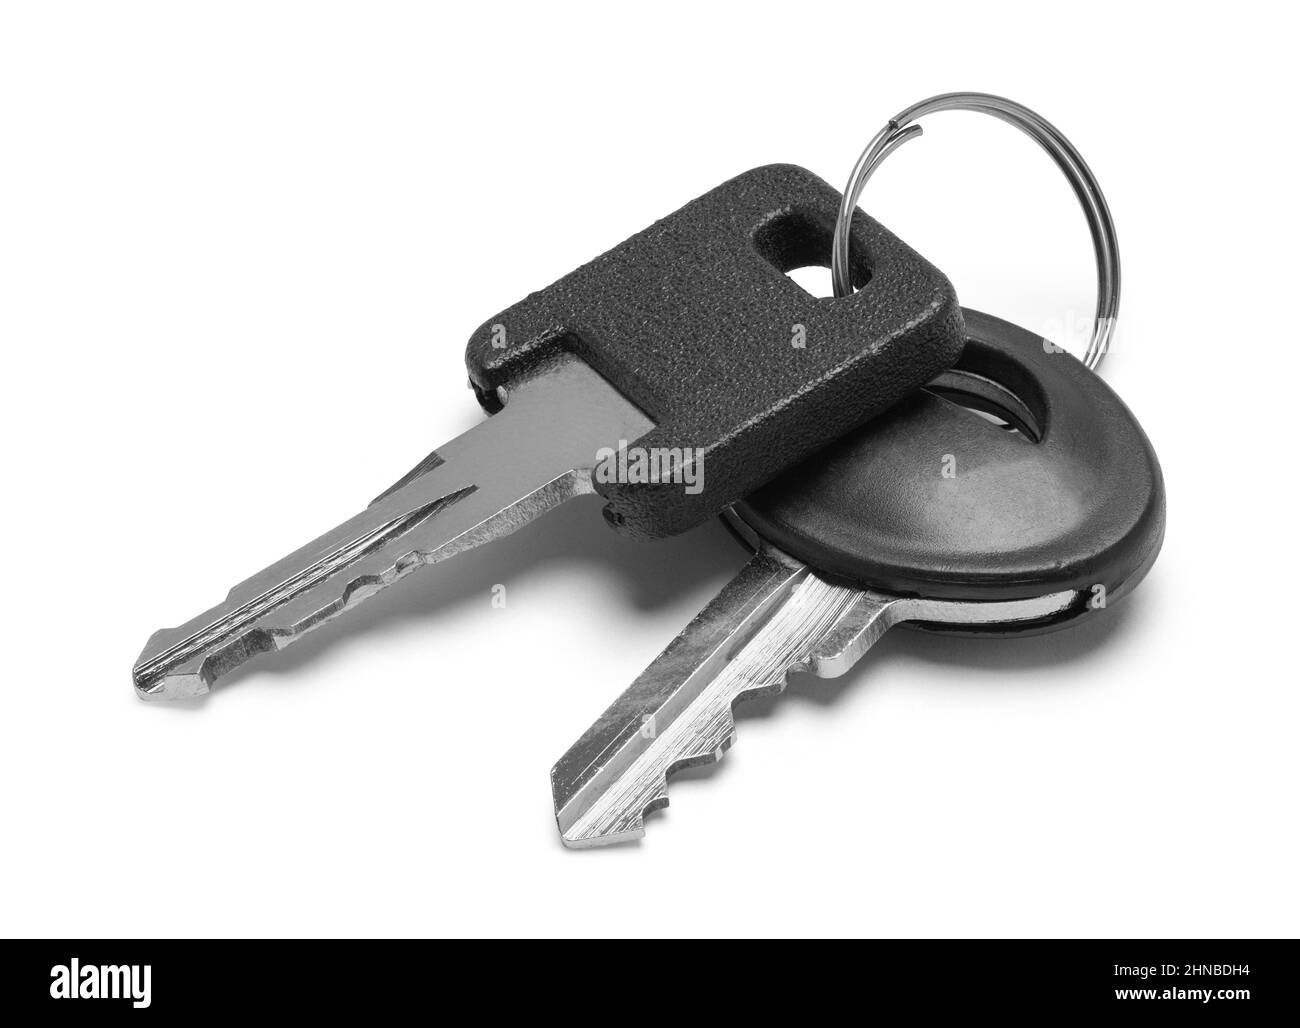 Small Set of Keys Cut Out on White. Stock Photo